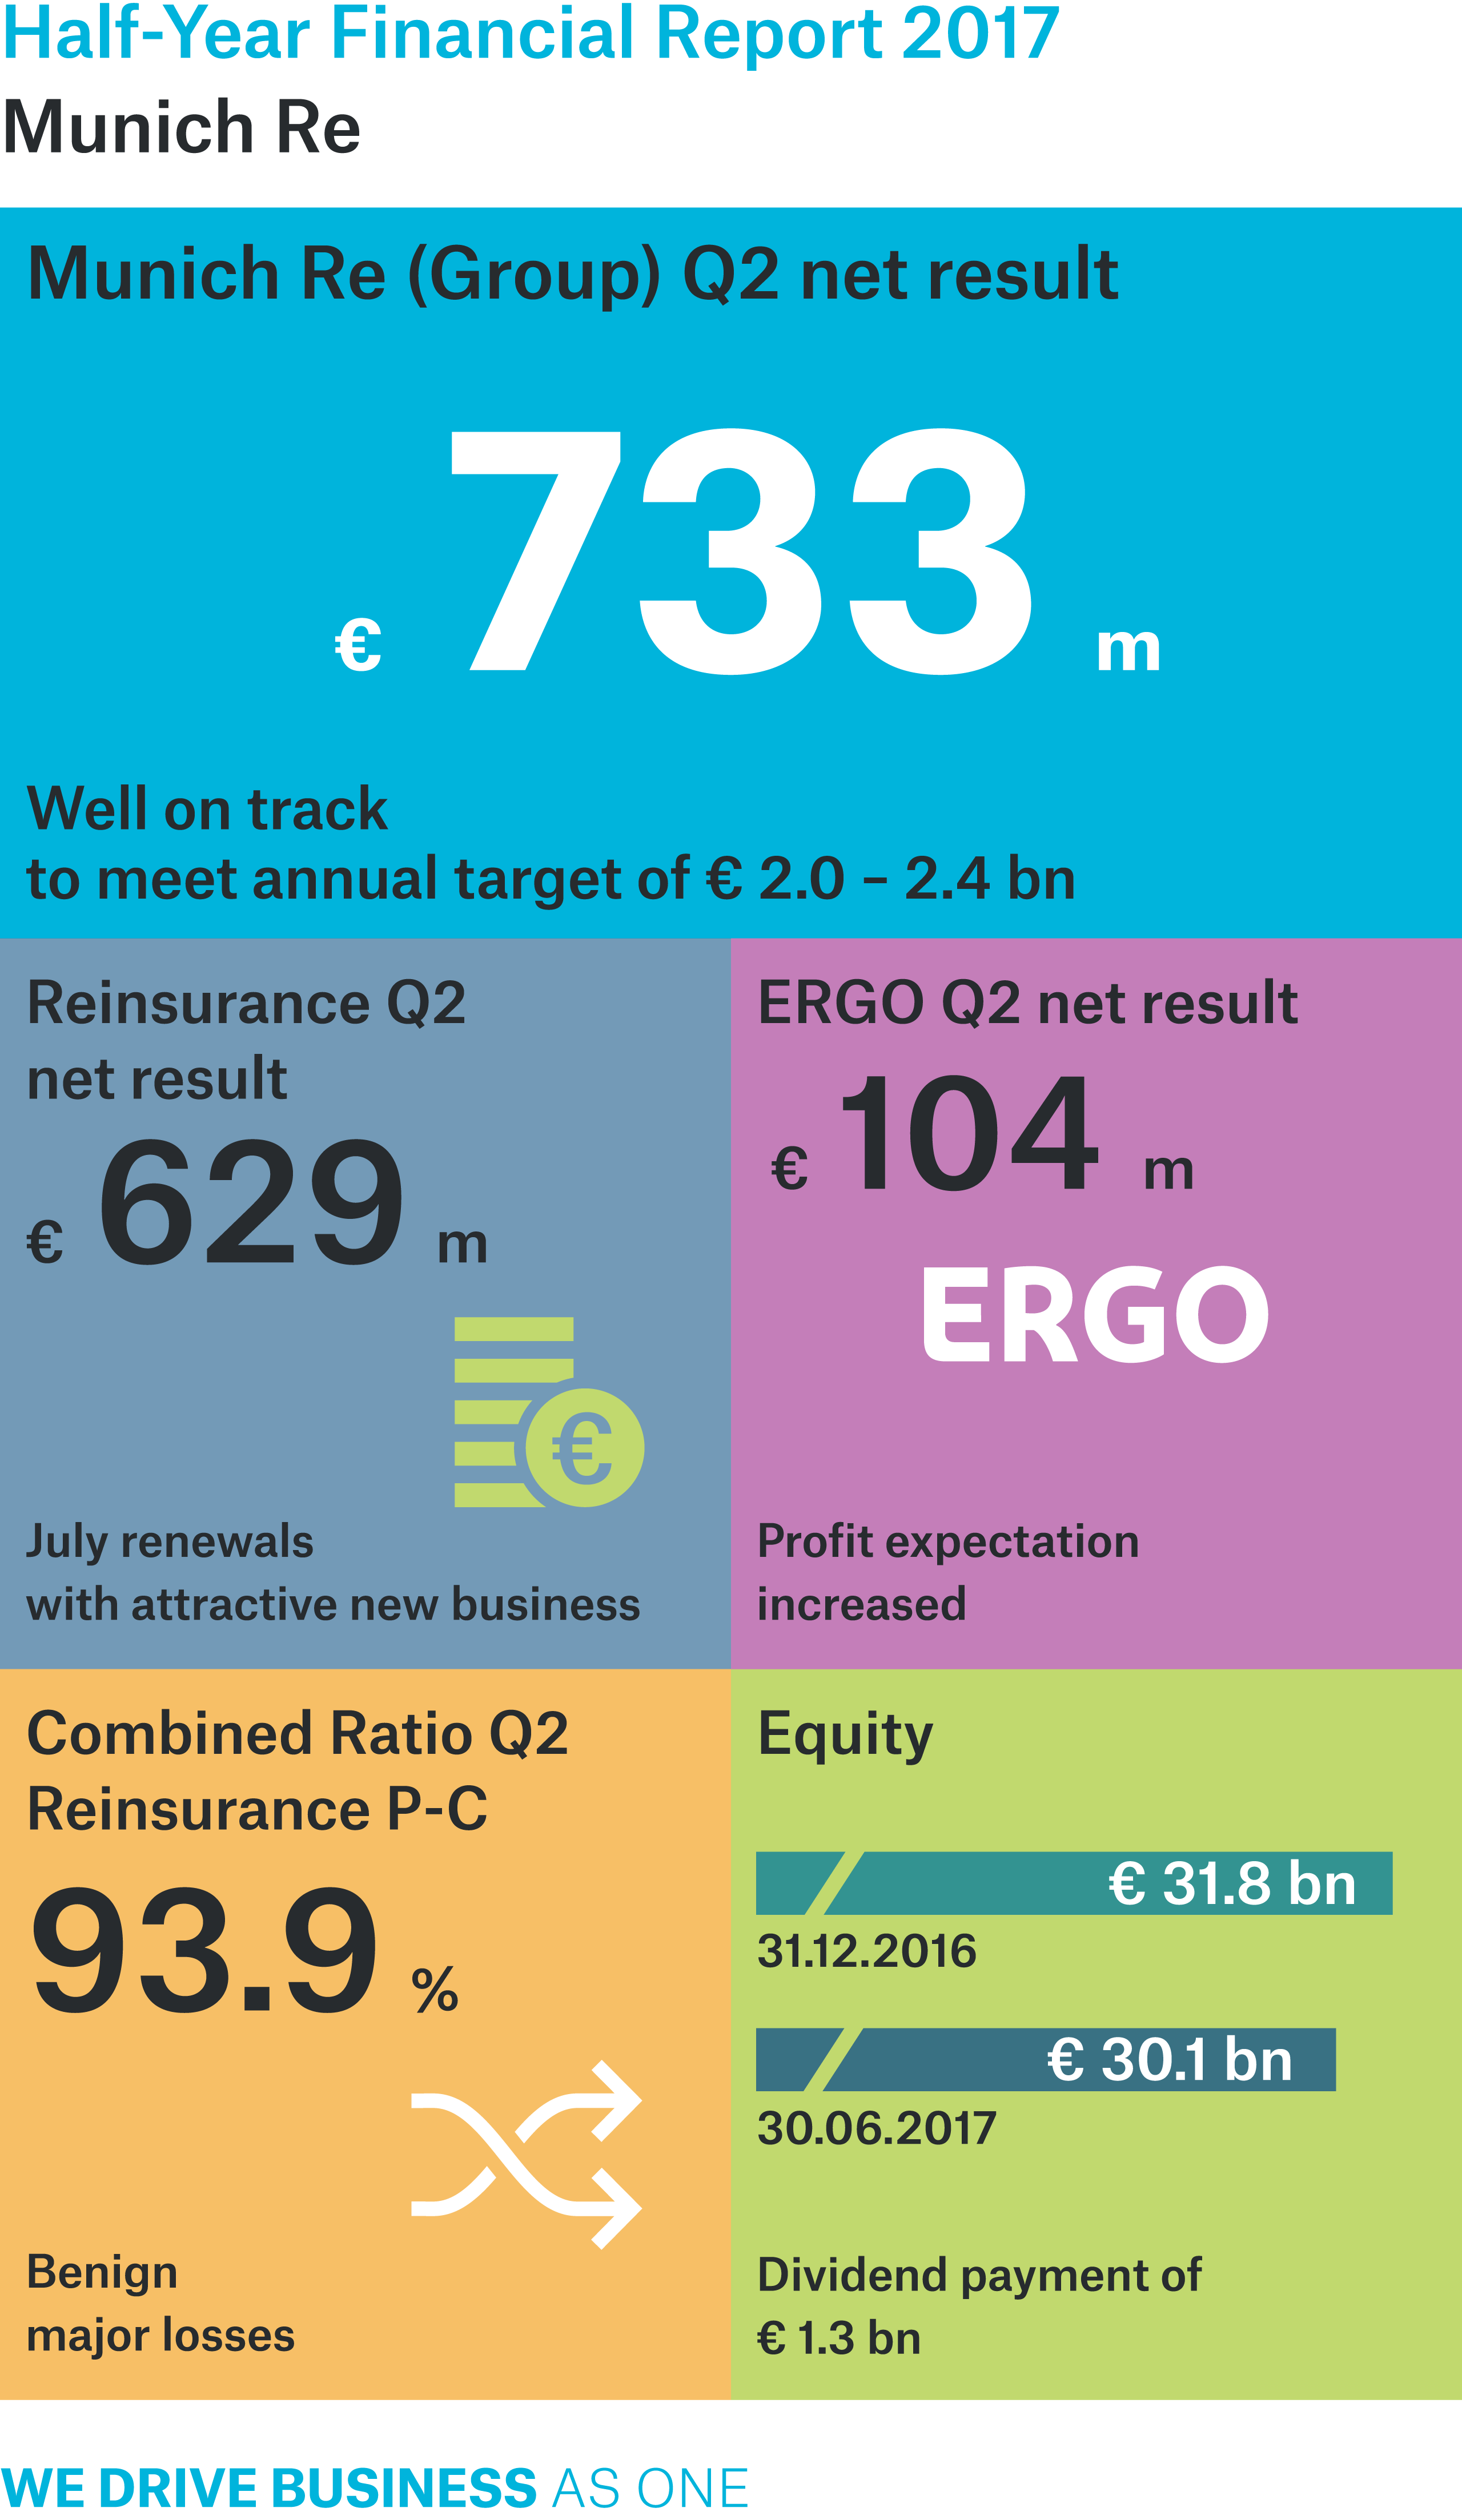 A high investment result and a below-average random incidence of major losses contributed to the sound result of €733m.